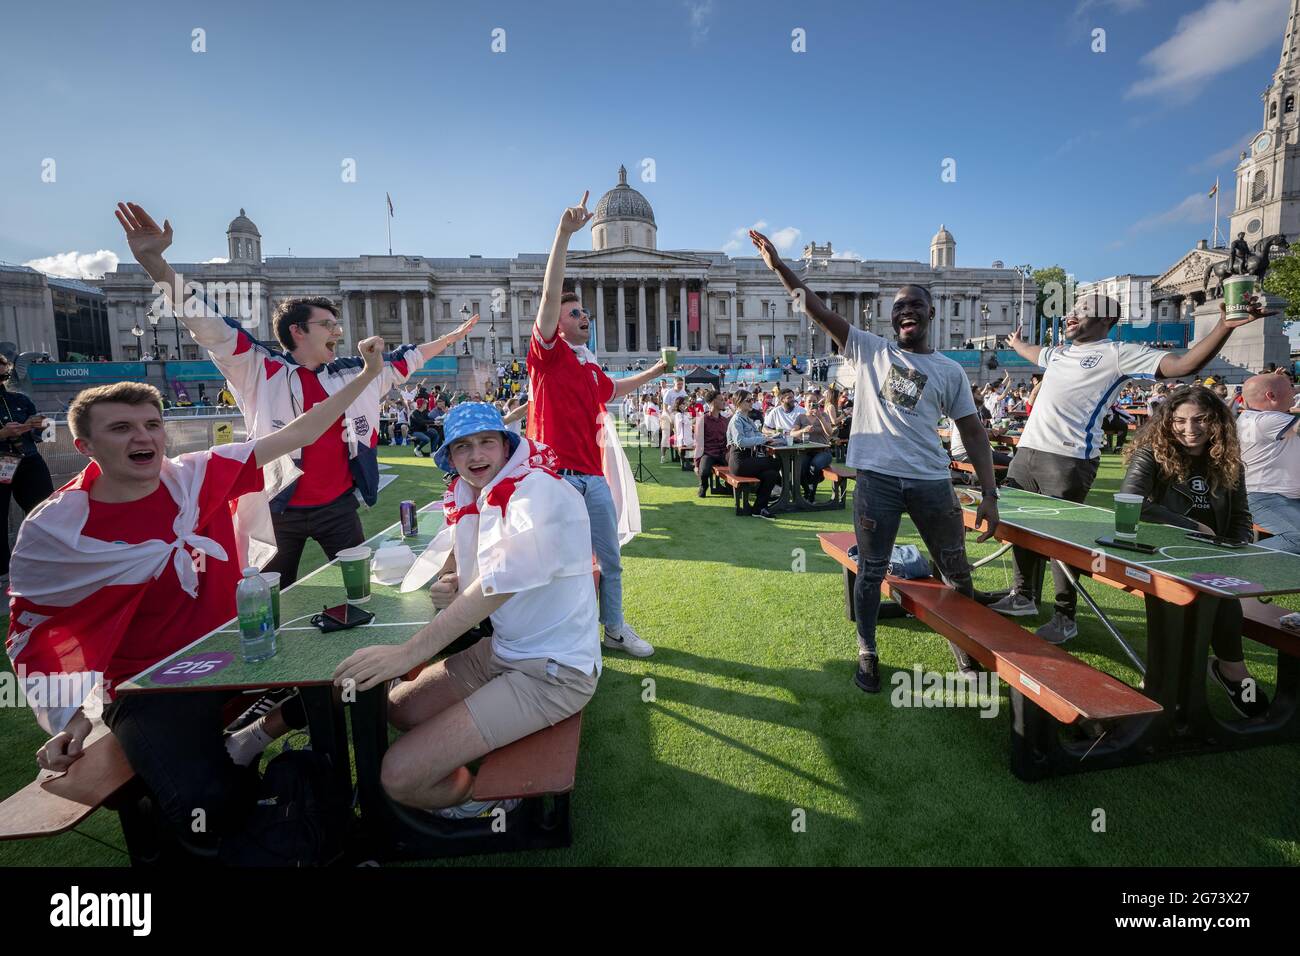 EURO 2020: England vs Denmark. England supporters watch the big screens in Trafalgar Square as England takes on Denmark for the semi-finals. London UK Stock Photo